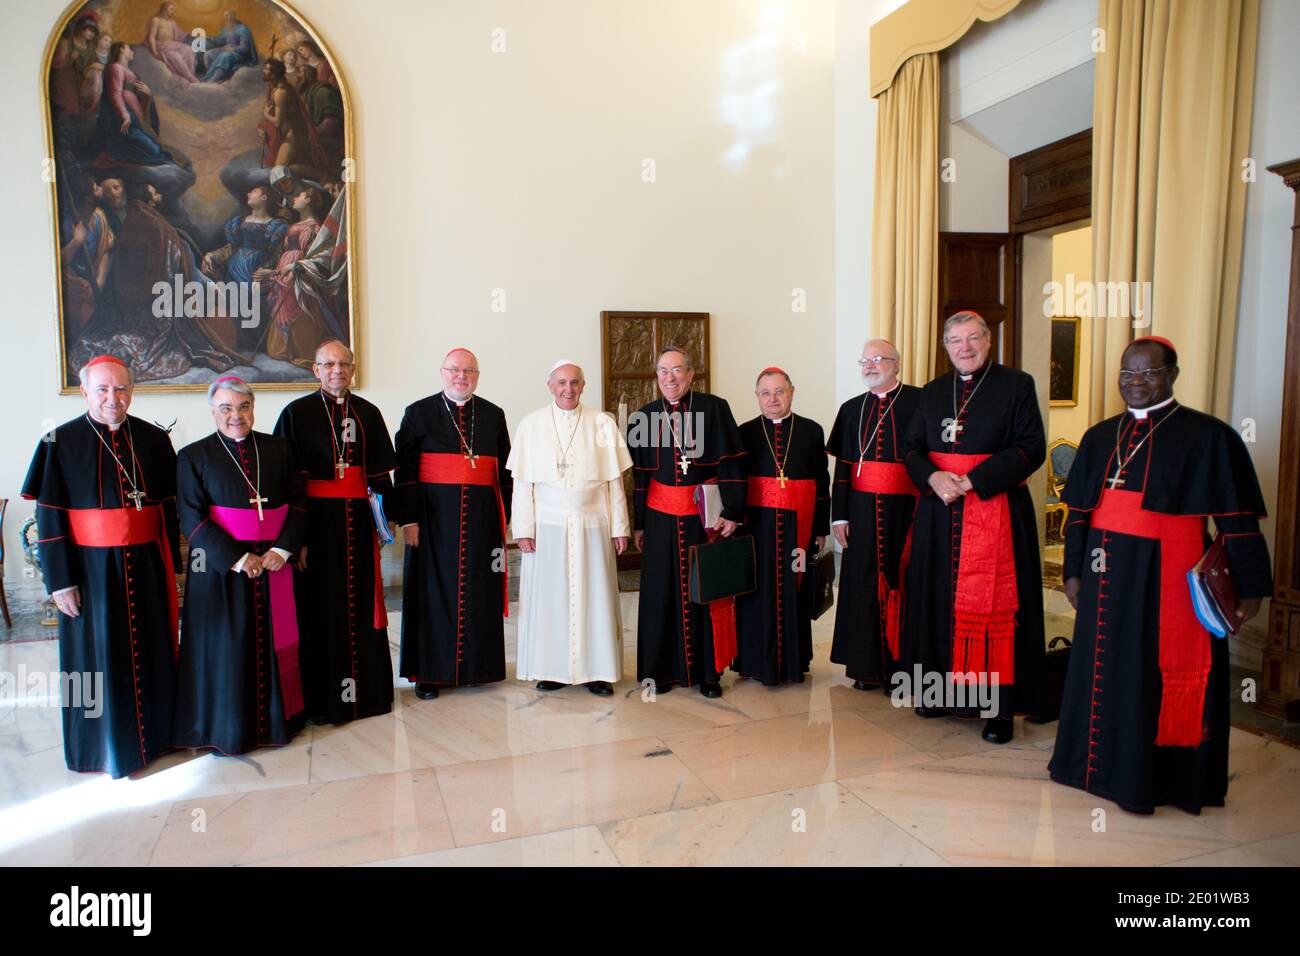 Pope Francis poses with cardinals during a meeting at the Vatican on October 1, 2013 for a first round of talks on reforming the Catholic Church. Eight cardinals began closed-door meetings with Pope Francis on to help him reform the Vatican's troubled administration, the Curia, and map out possible changes in the worldwide Church. Left to right : Fancisco Javier Errazuriz Ossa, Marcello Semeraro (secretary), Oswald Gracias, Reinhard Marx, pope Francis, Andres Rodriguez Maradiaga, Giuseppe Bertello, Sean Patrick O'Malley, George Pell, Laurent Monsengwo Pasinya. Pope Francis has been named Perso Stock Photo